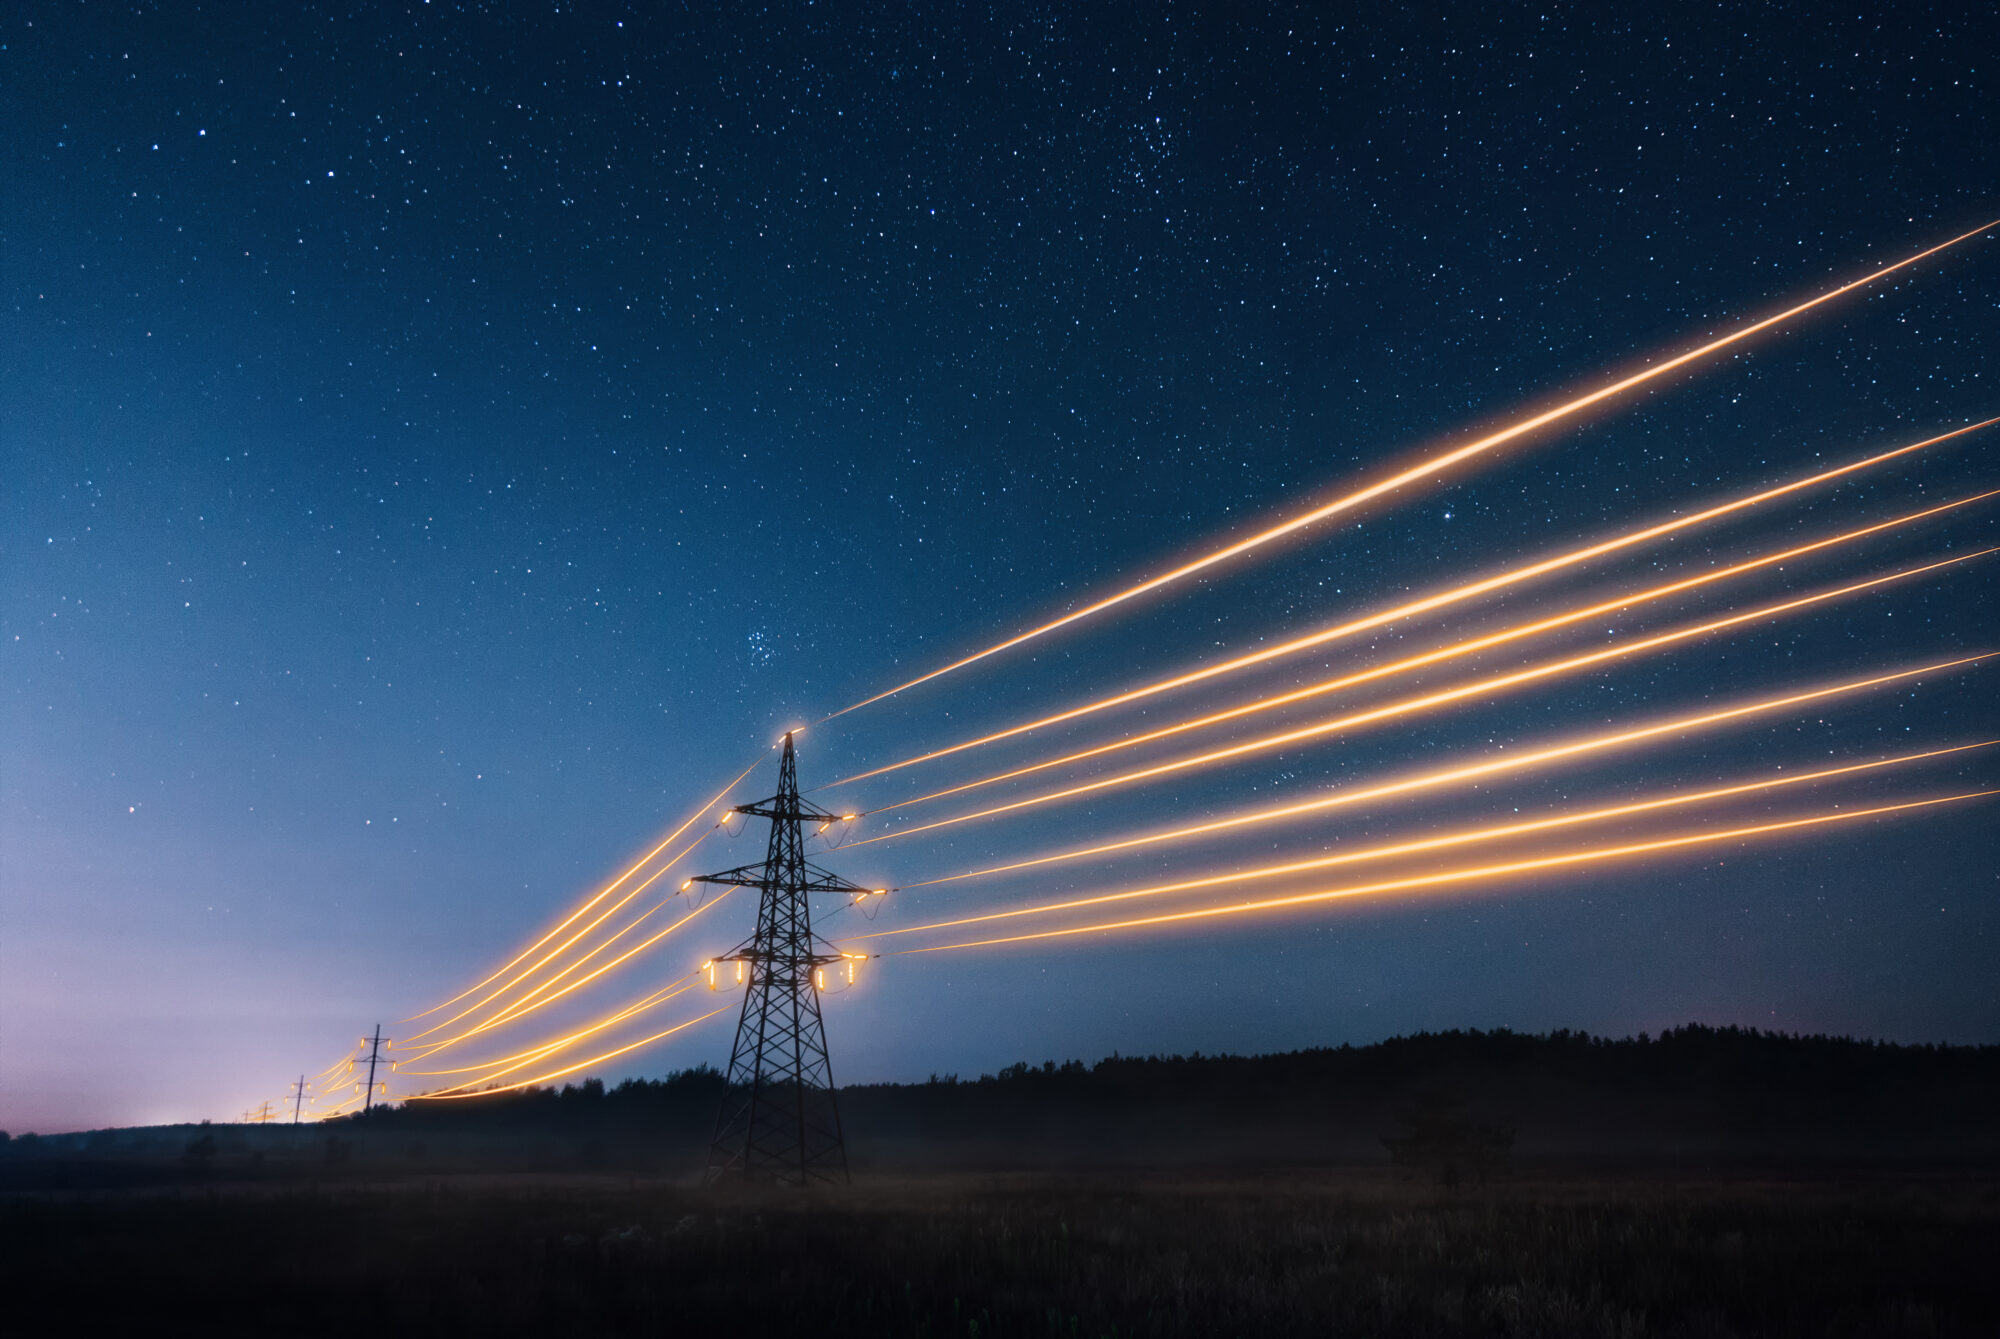 Electricity Transmission Towers With Orange Glowing Wires Against Night Sky.